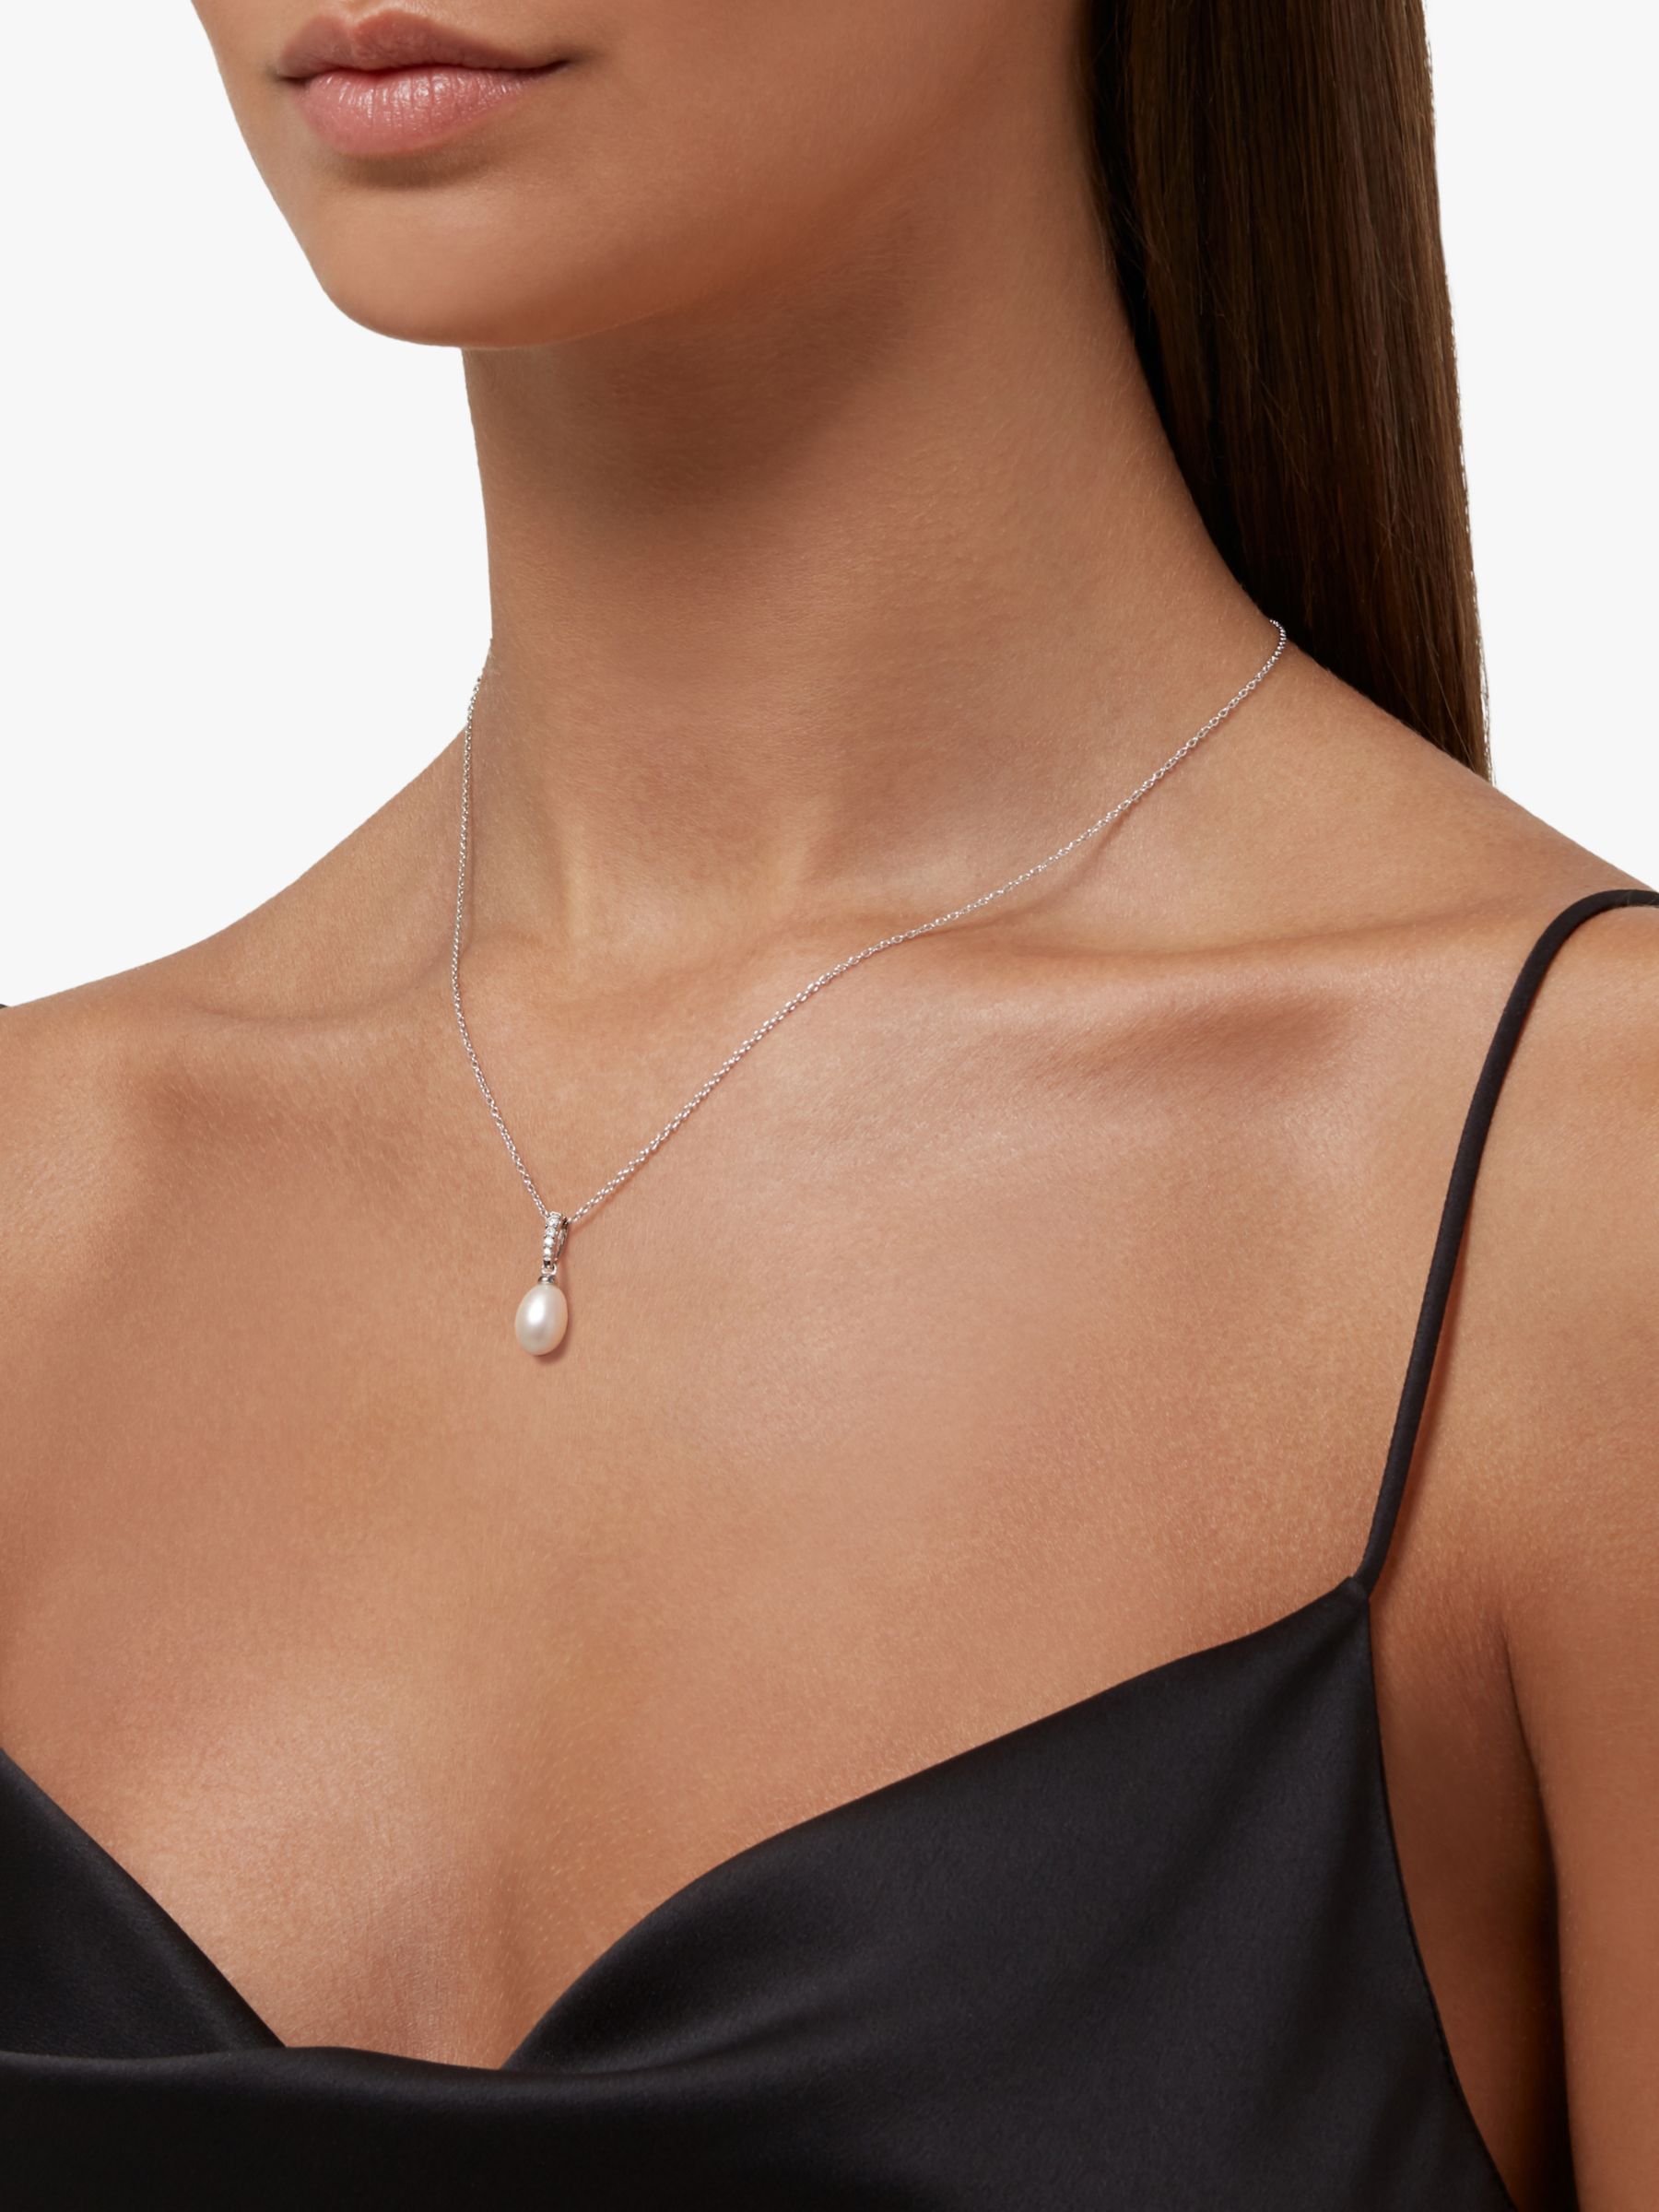 Buy A B Davis 9ct White Gold Freshwater Pearl and Diamond Pendant Necklace Online at johnlewis.com